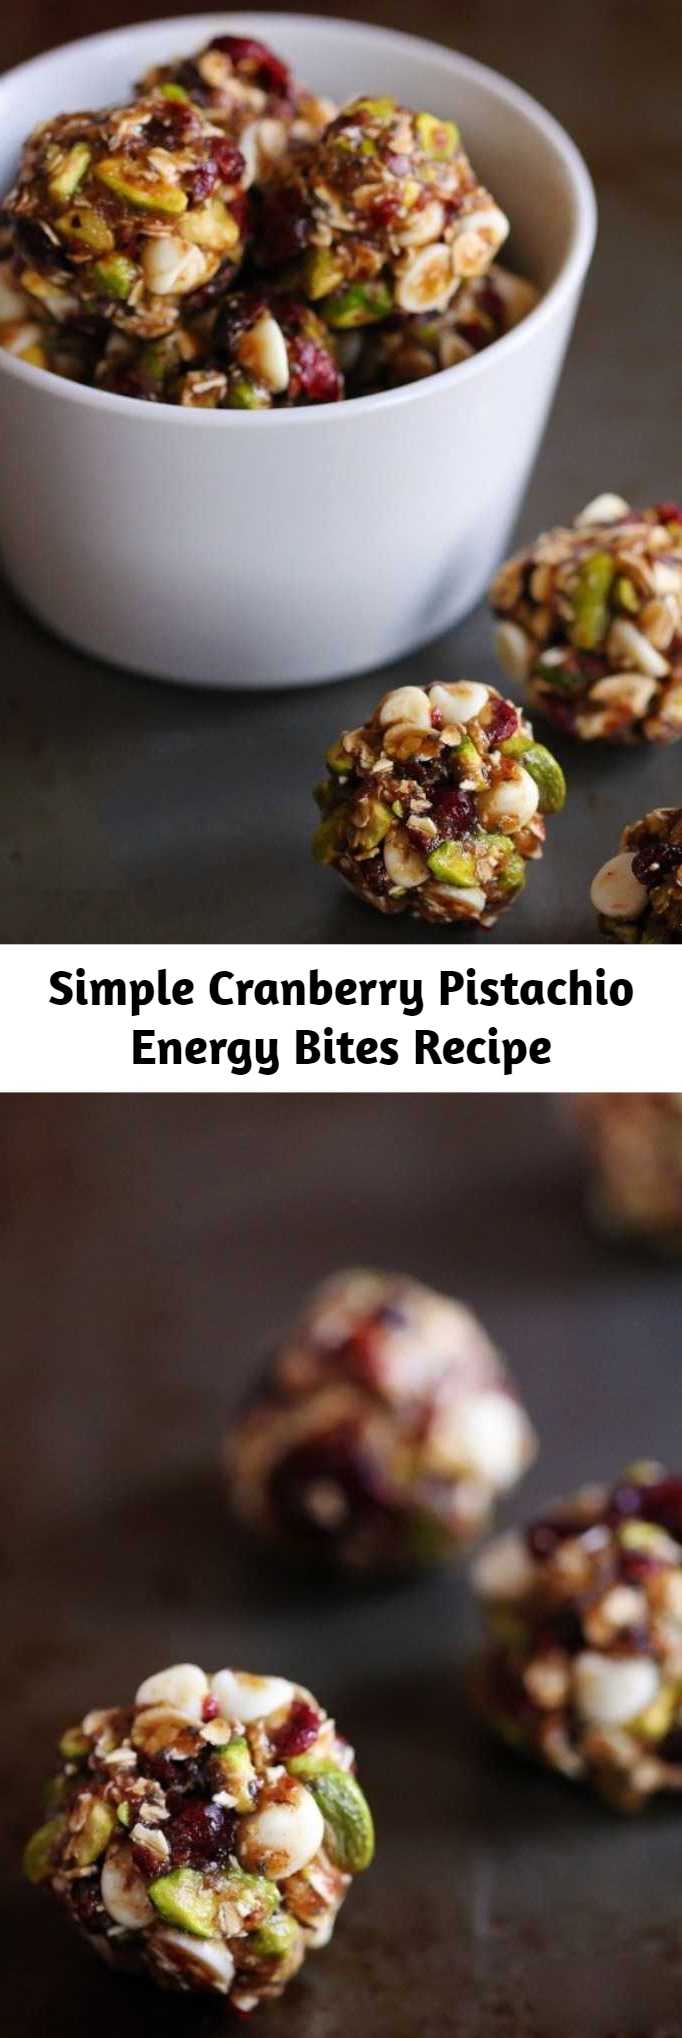 Simple Cranberry Pistachio Energy Bites Recipe - Kick up your energy with these simple and healthy no-bake Cranberry Pistachio Energy Bites!